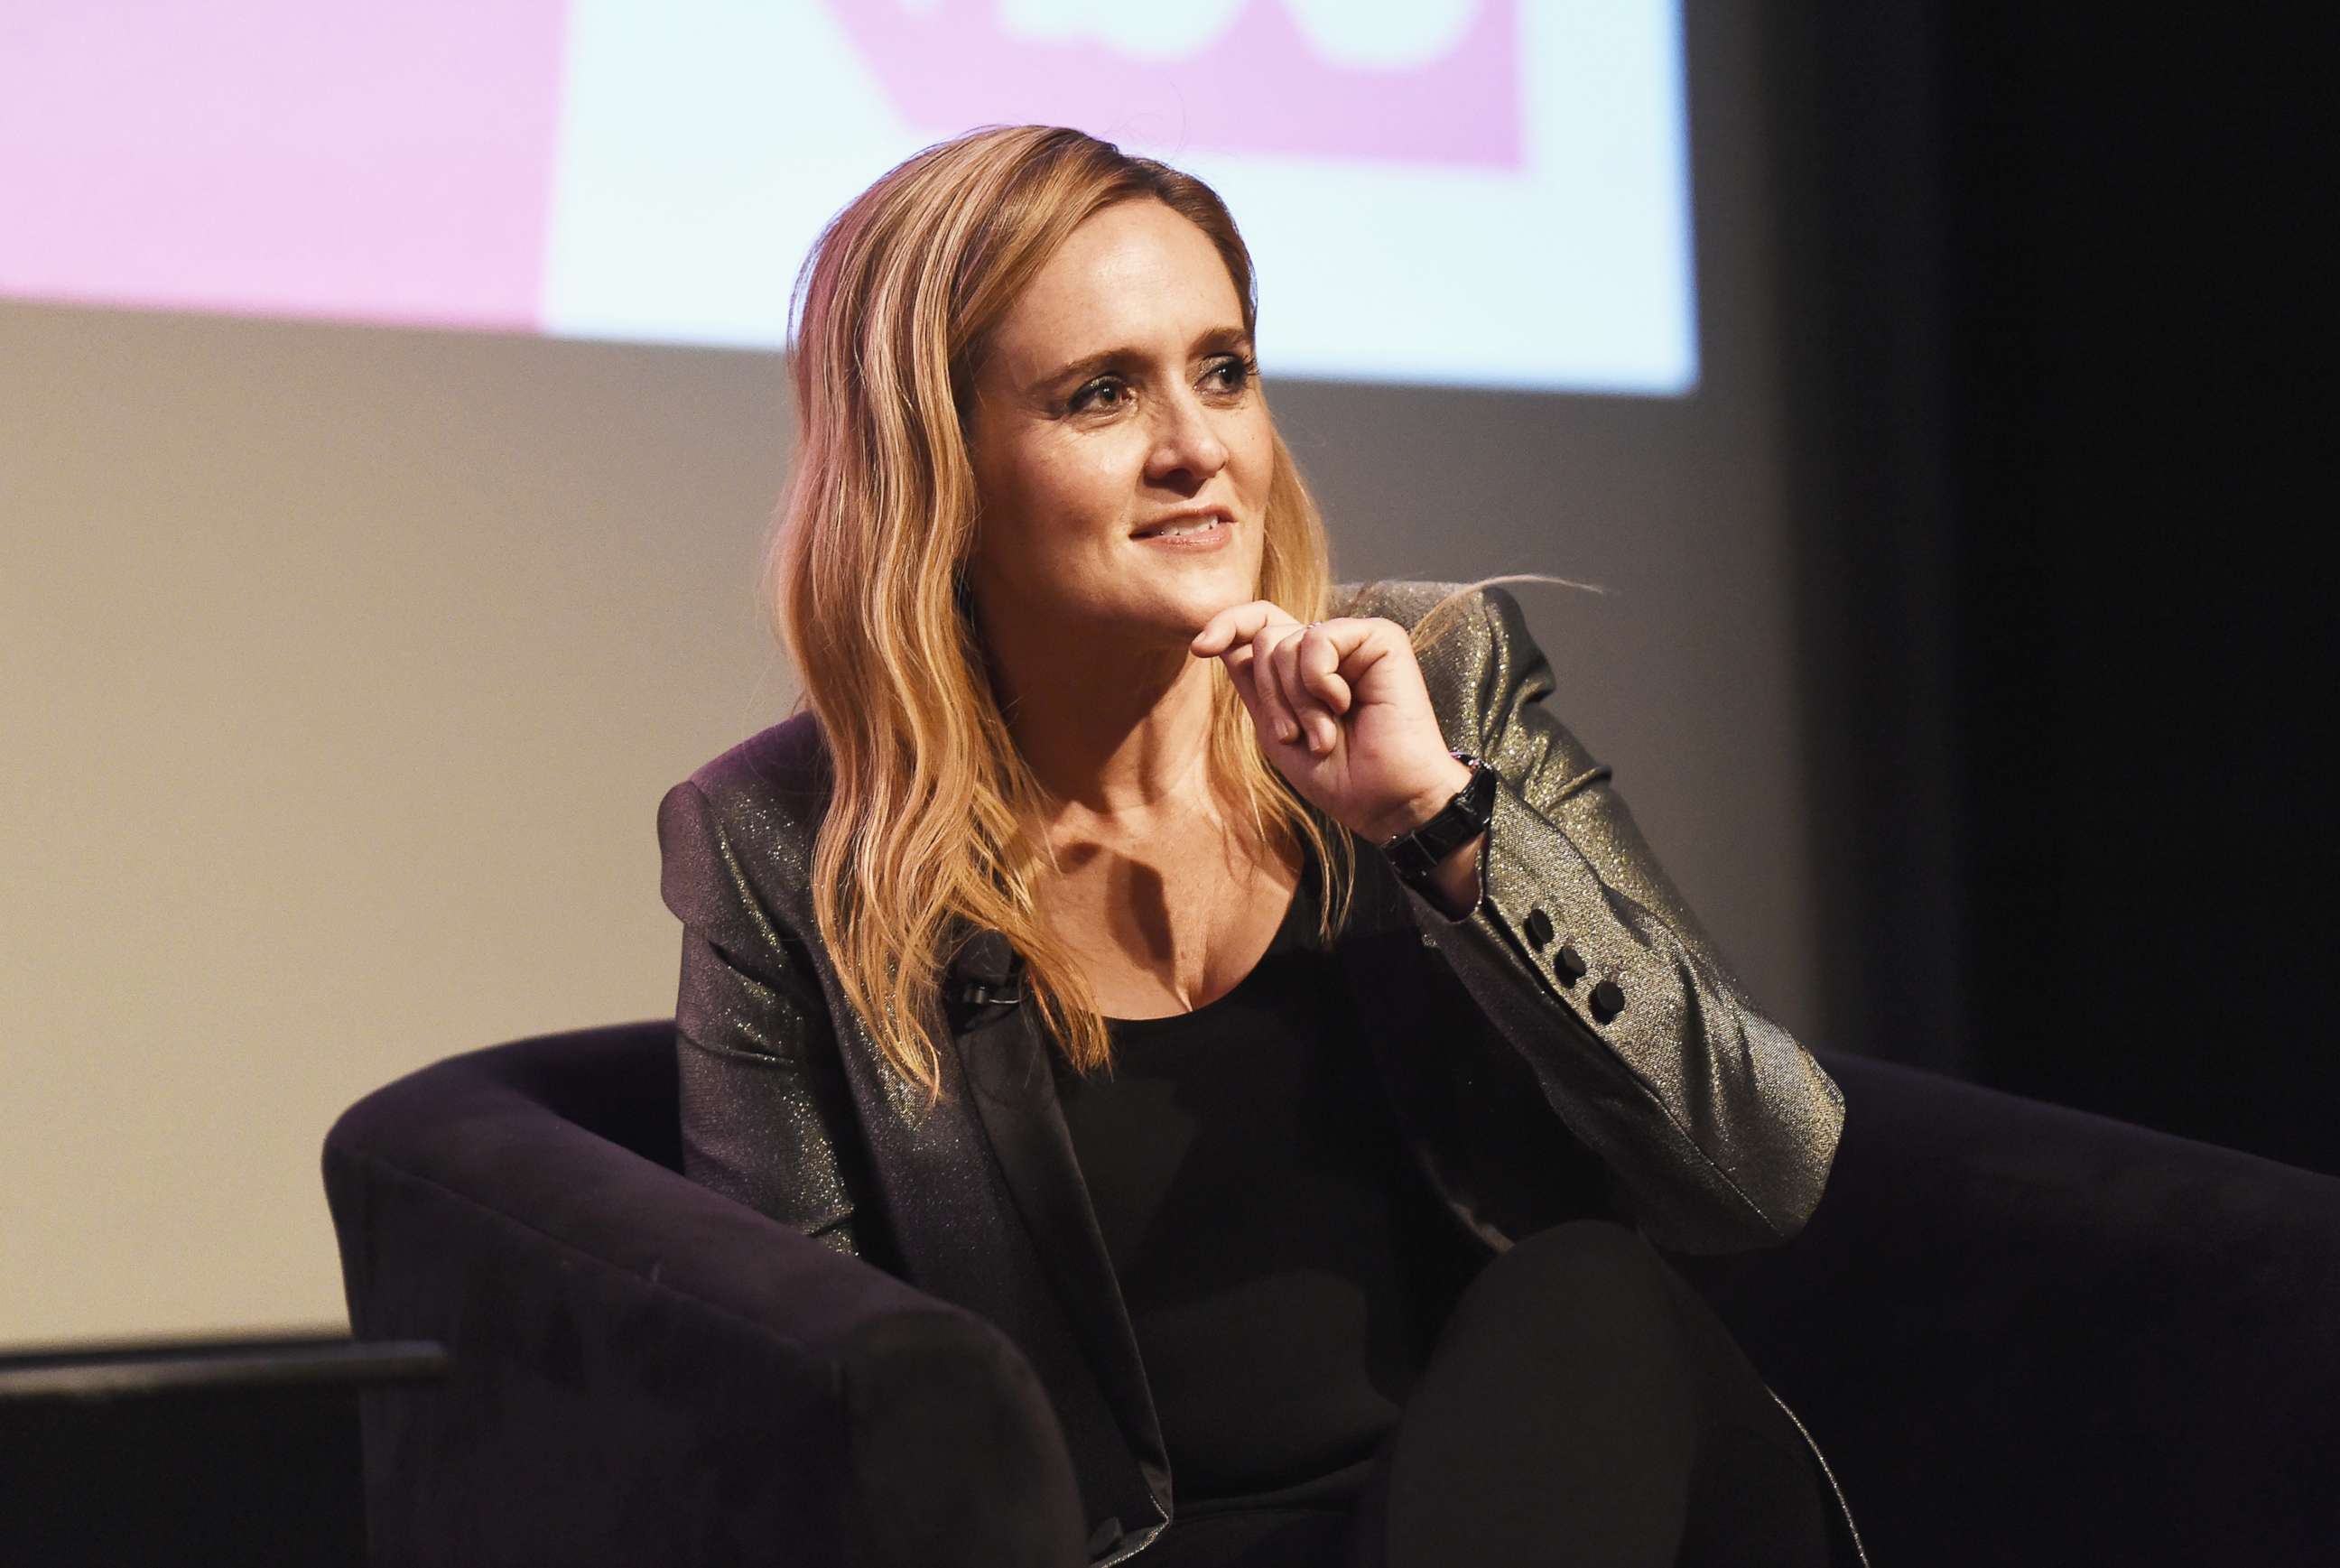 PHOTO: Samantha Bee attends TBS' "Full Frontal With Samantha Bee" FYC Event at the Writers Guild Theater on May 24, 2018, in Beverly Hills, Calif.